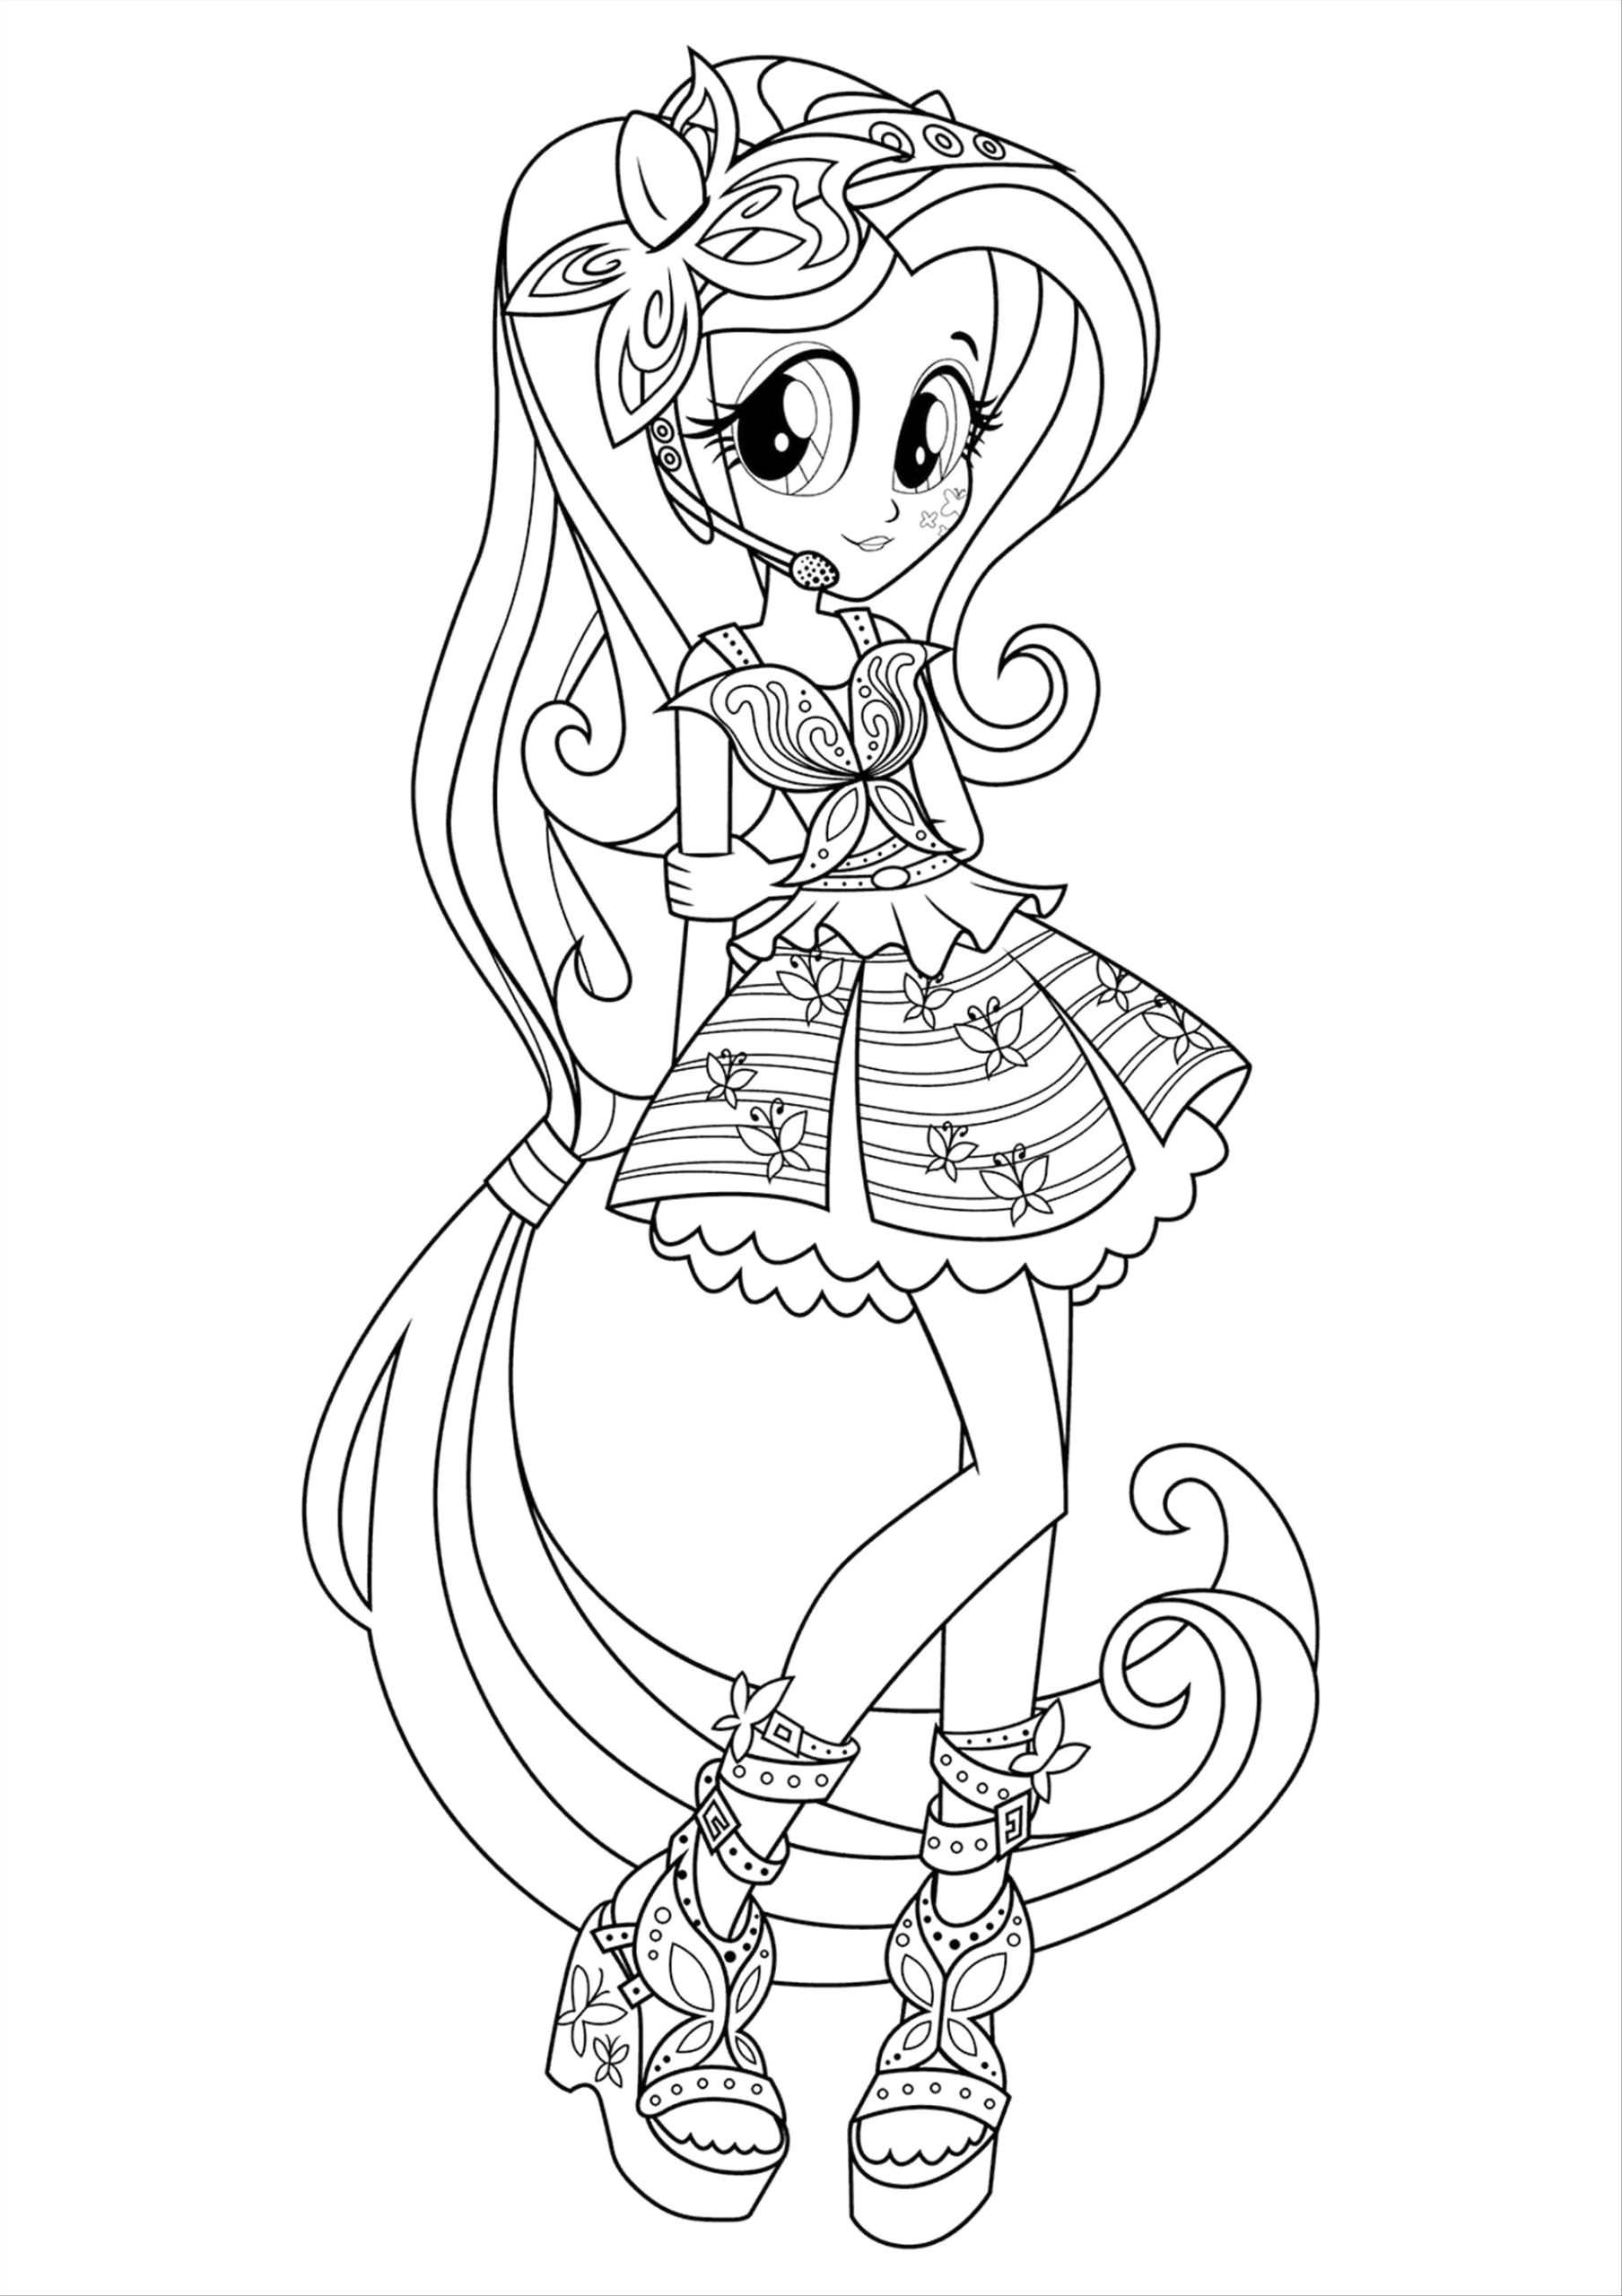 Coloring Pages : Sunset Shimmer Equestria Girl Coloring Page ...